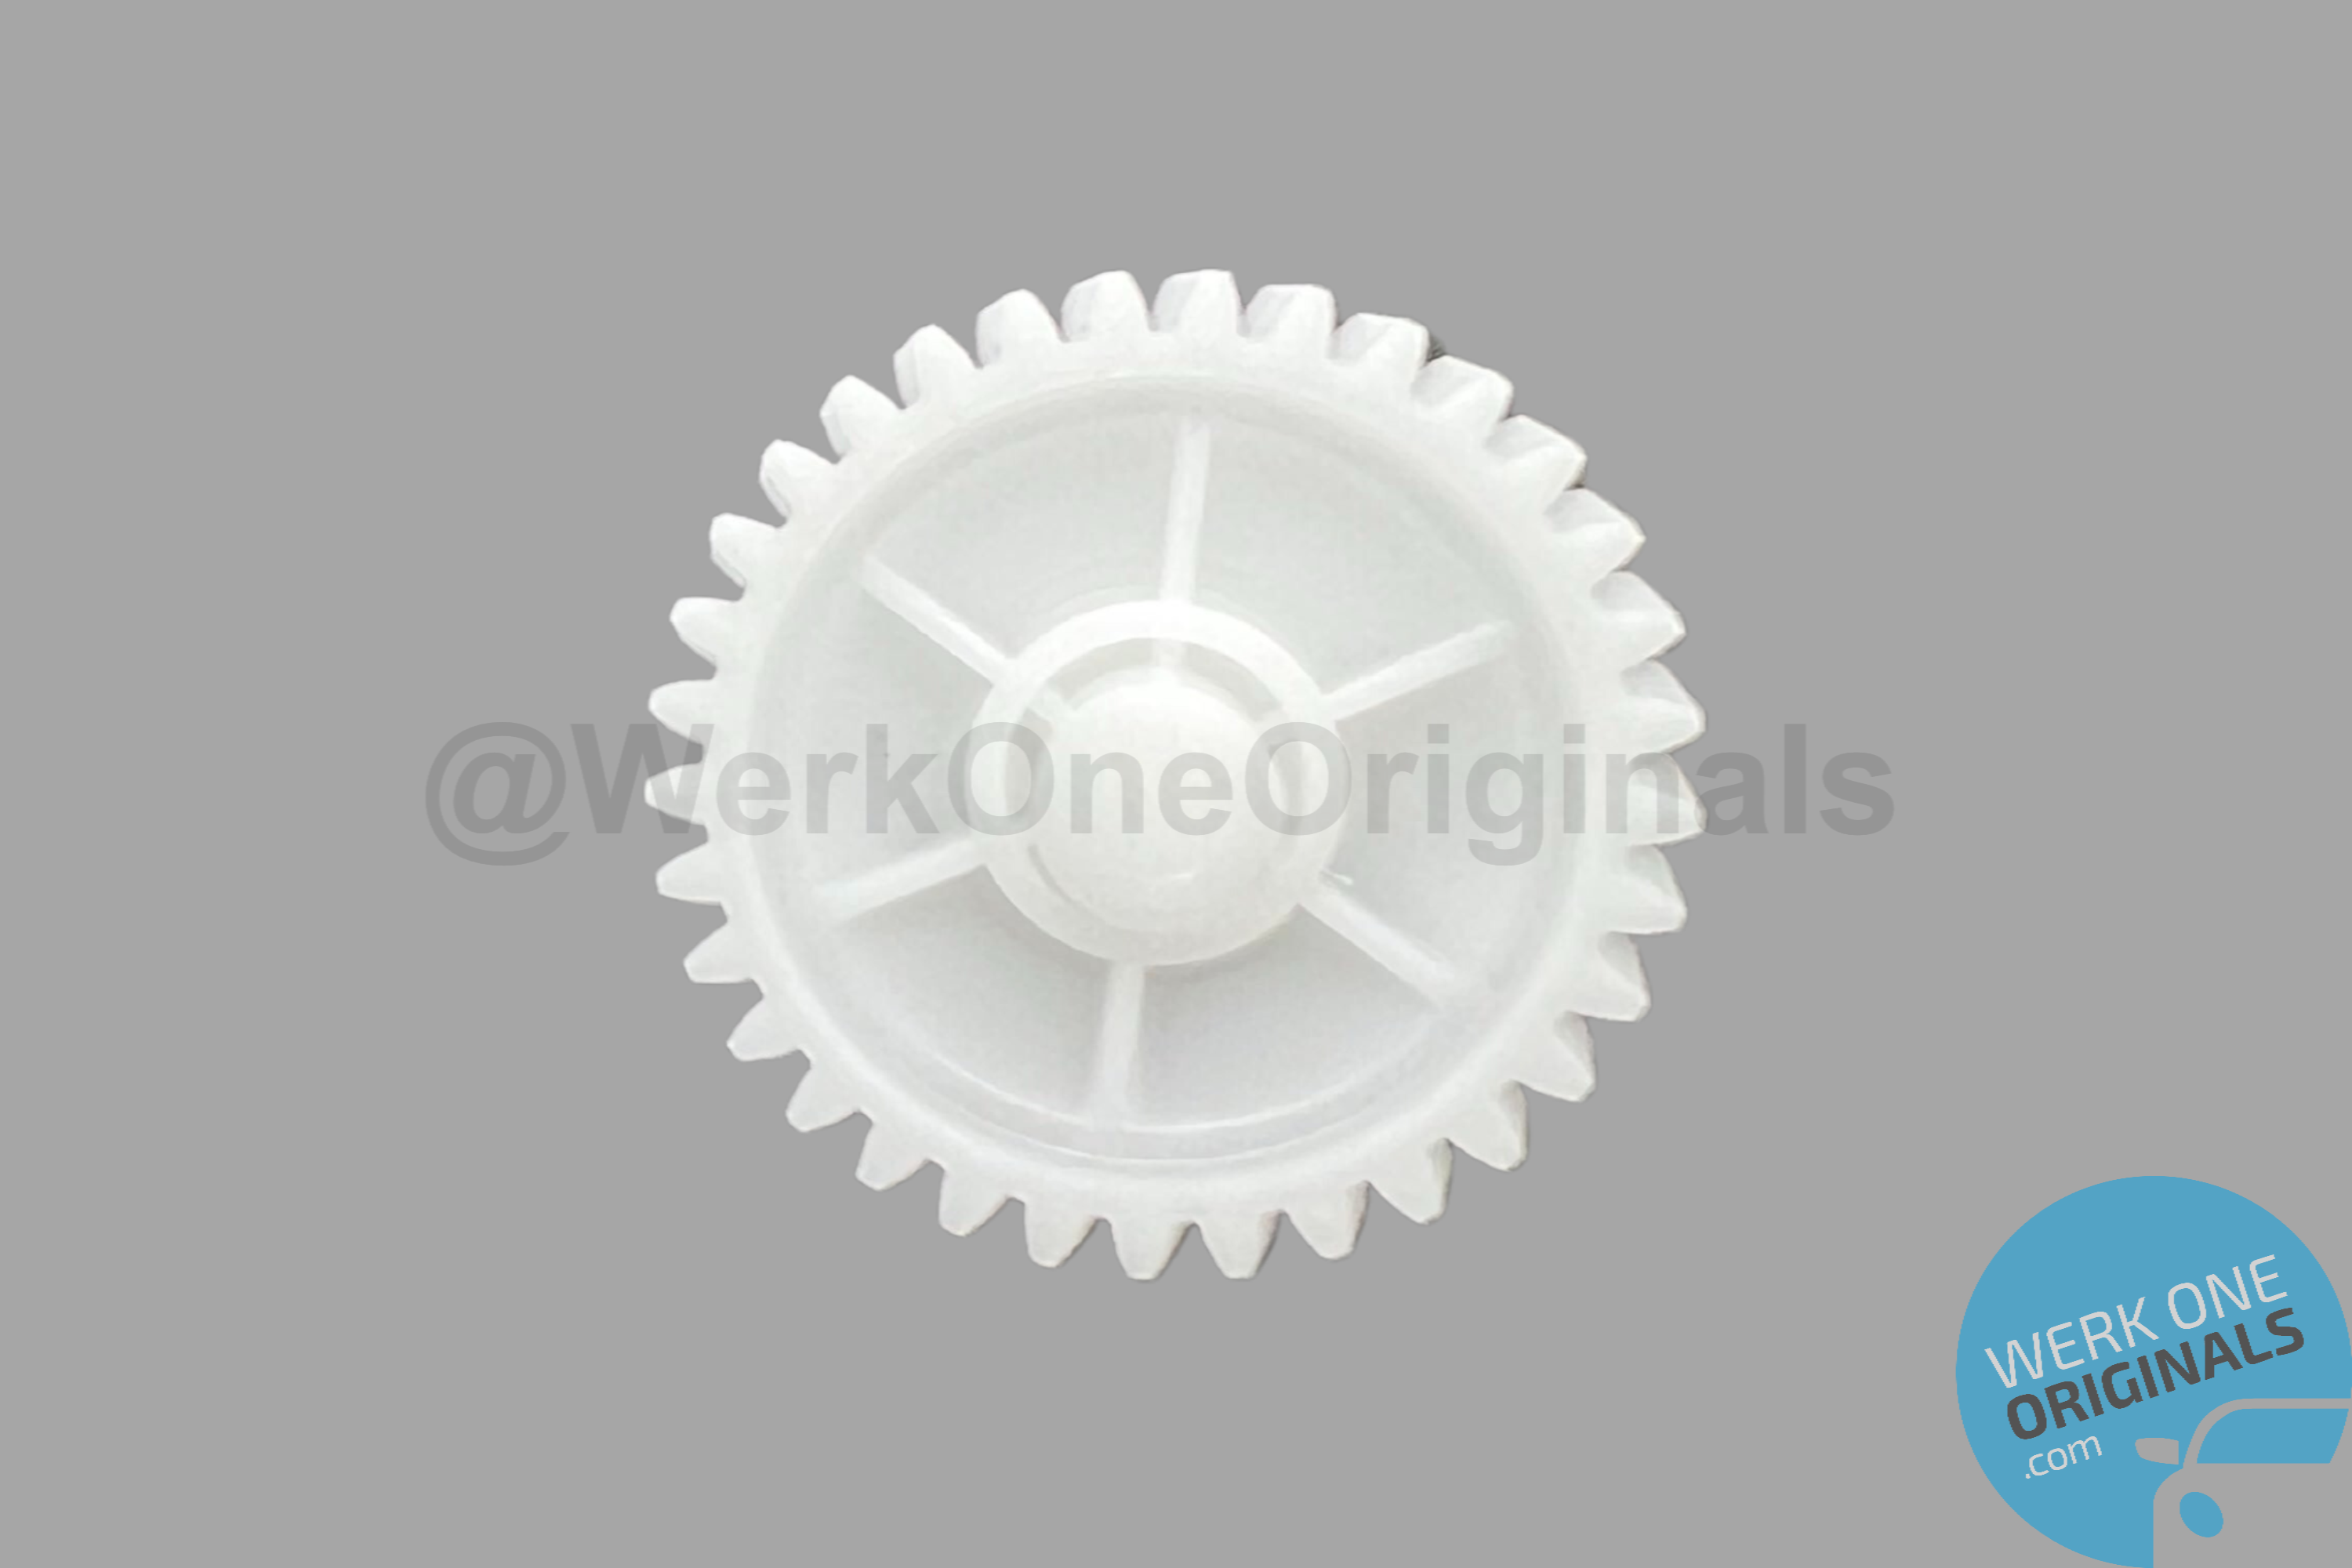 Porsche Genuine Replacement Sunroof Drive Gear for 944 Models